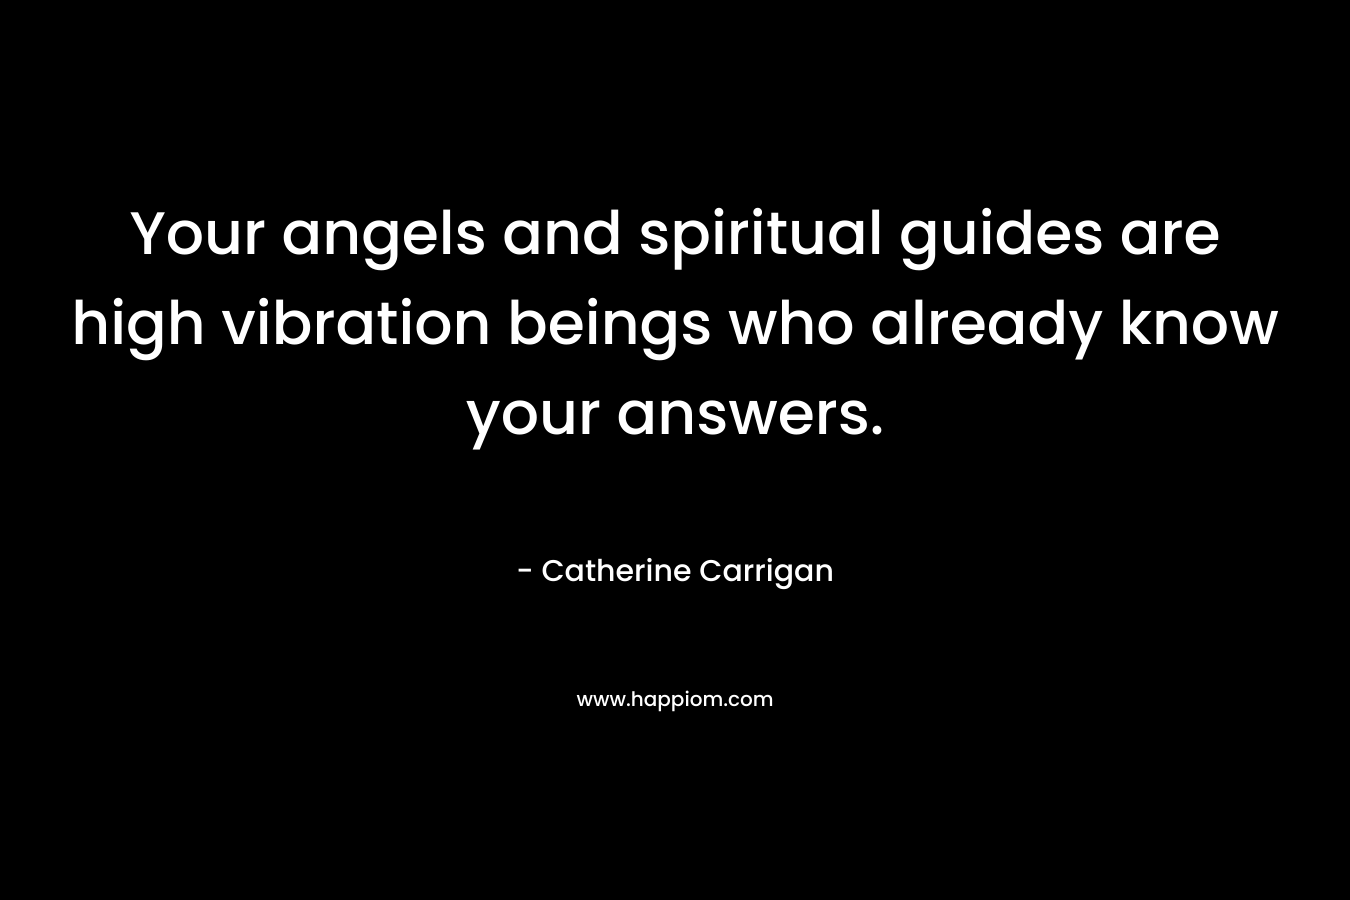 Your angels and spiritual guides are high vibration beings who already know your answers. – Catherine Carrigan